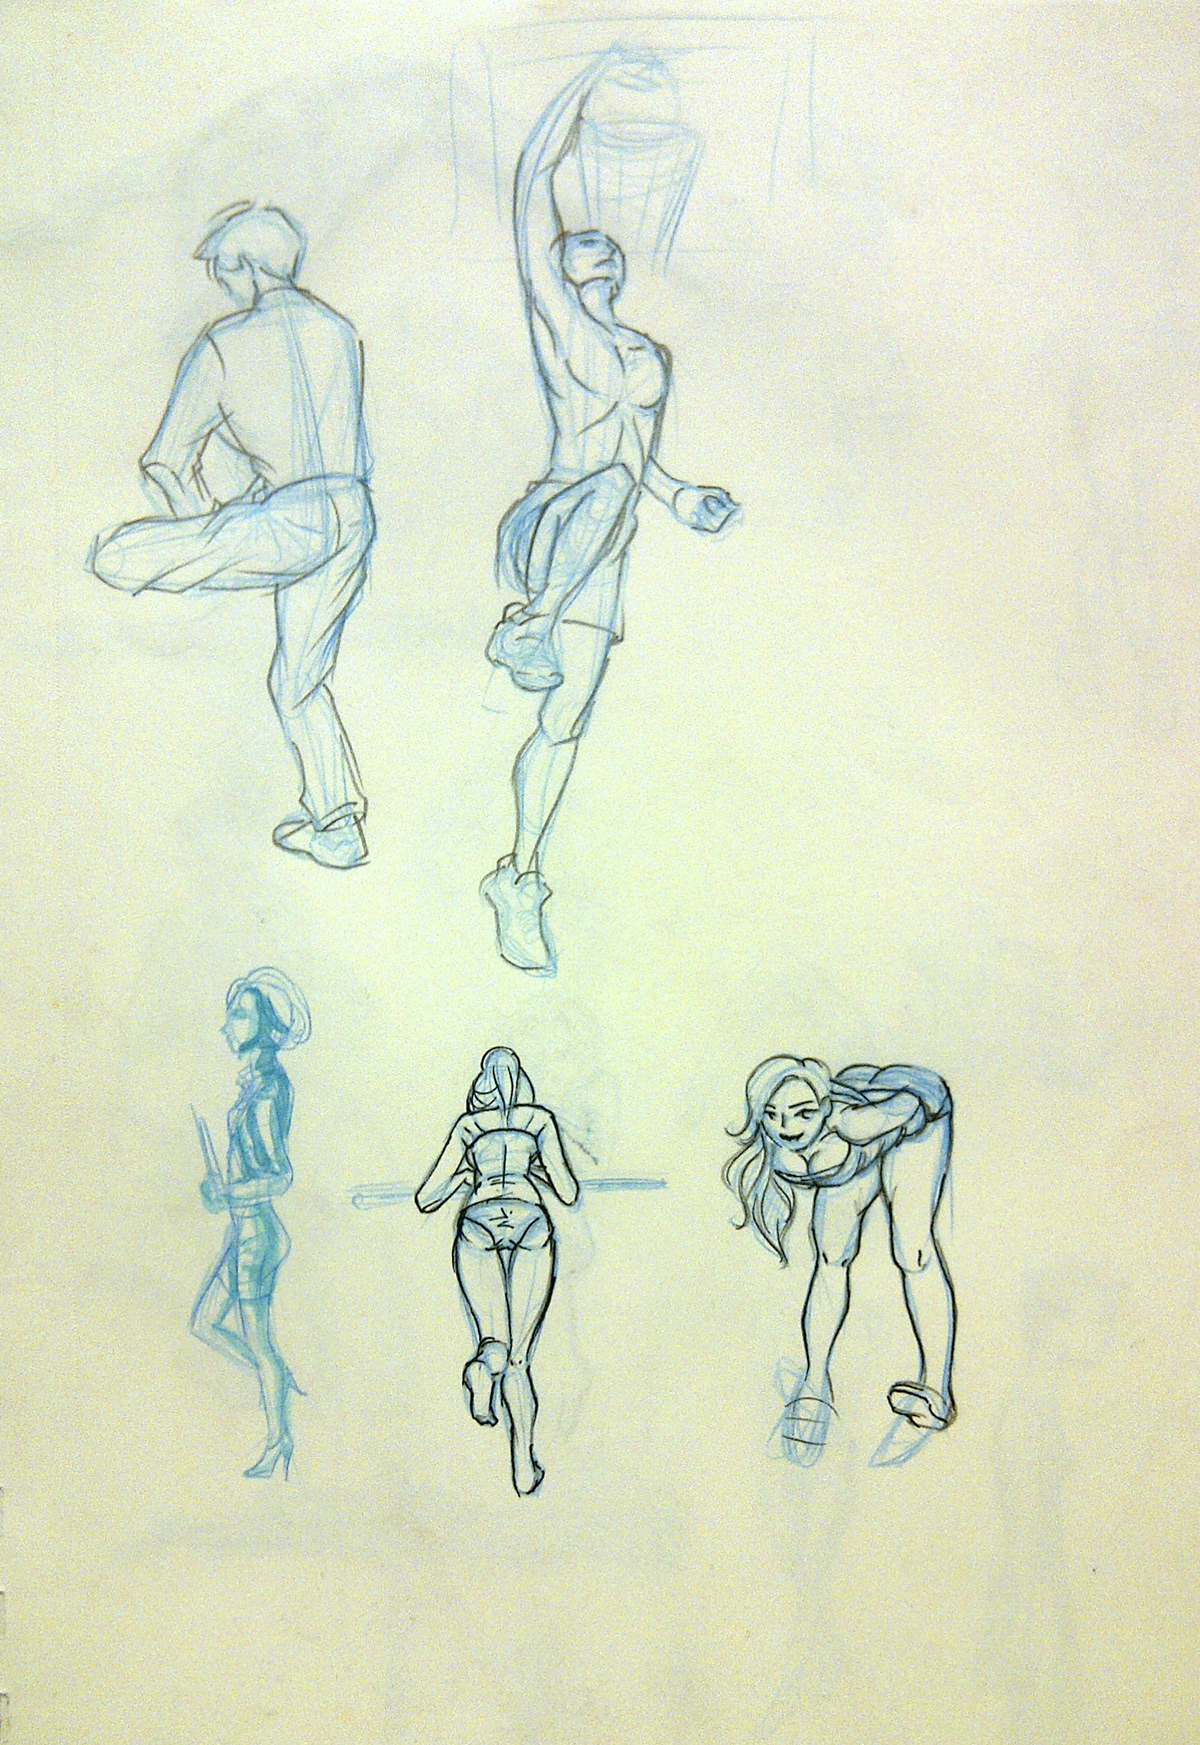 Anything life life drawing life painting commision sketch traditional art Clusters doodles